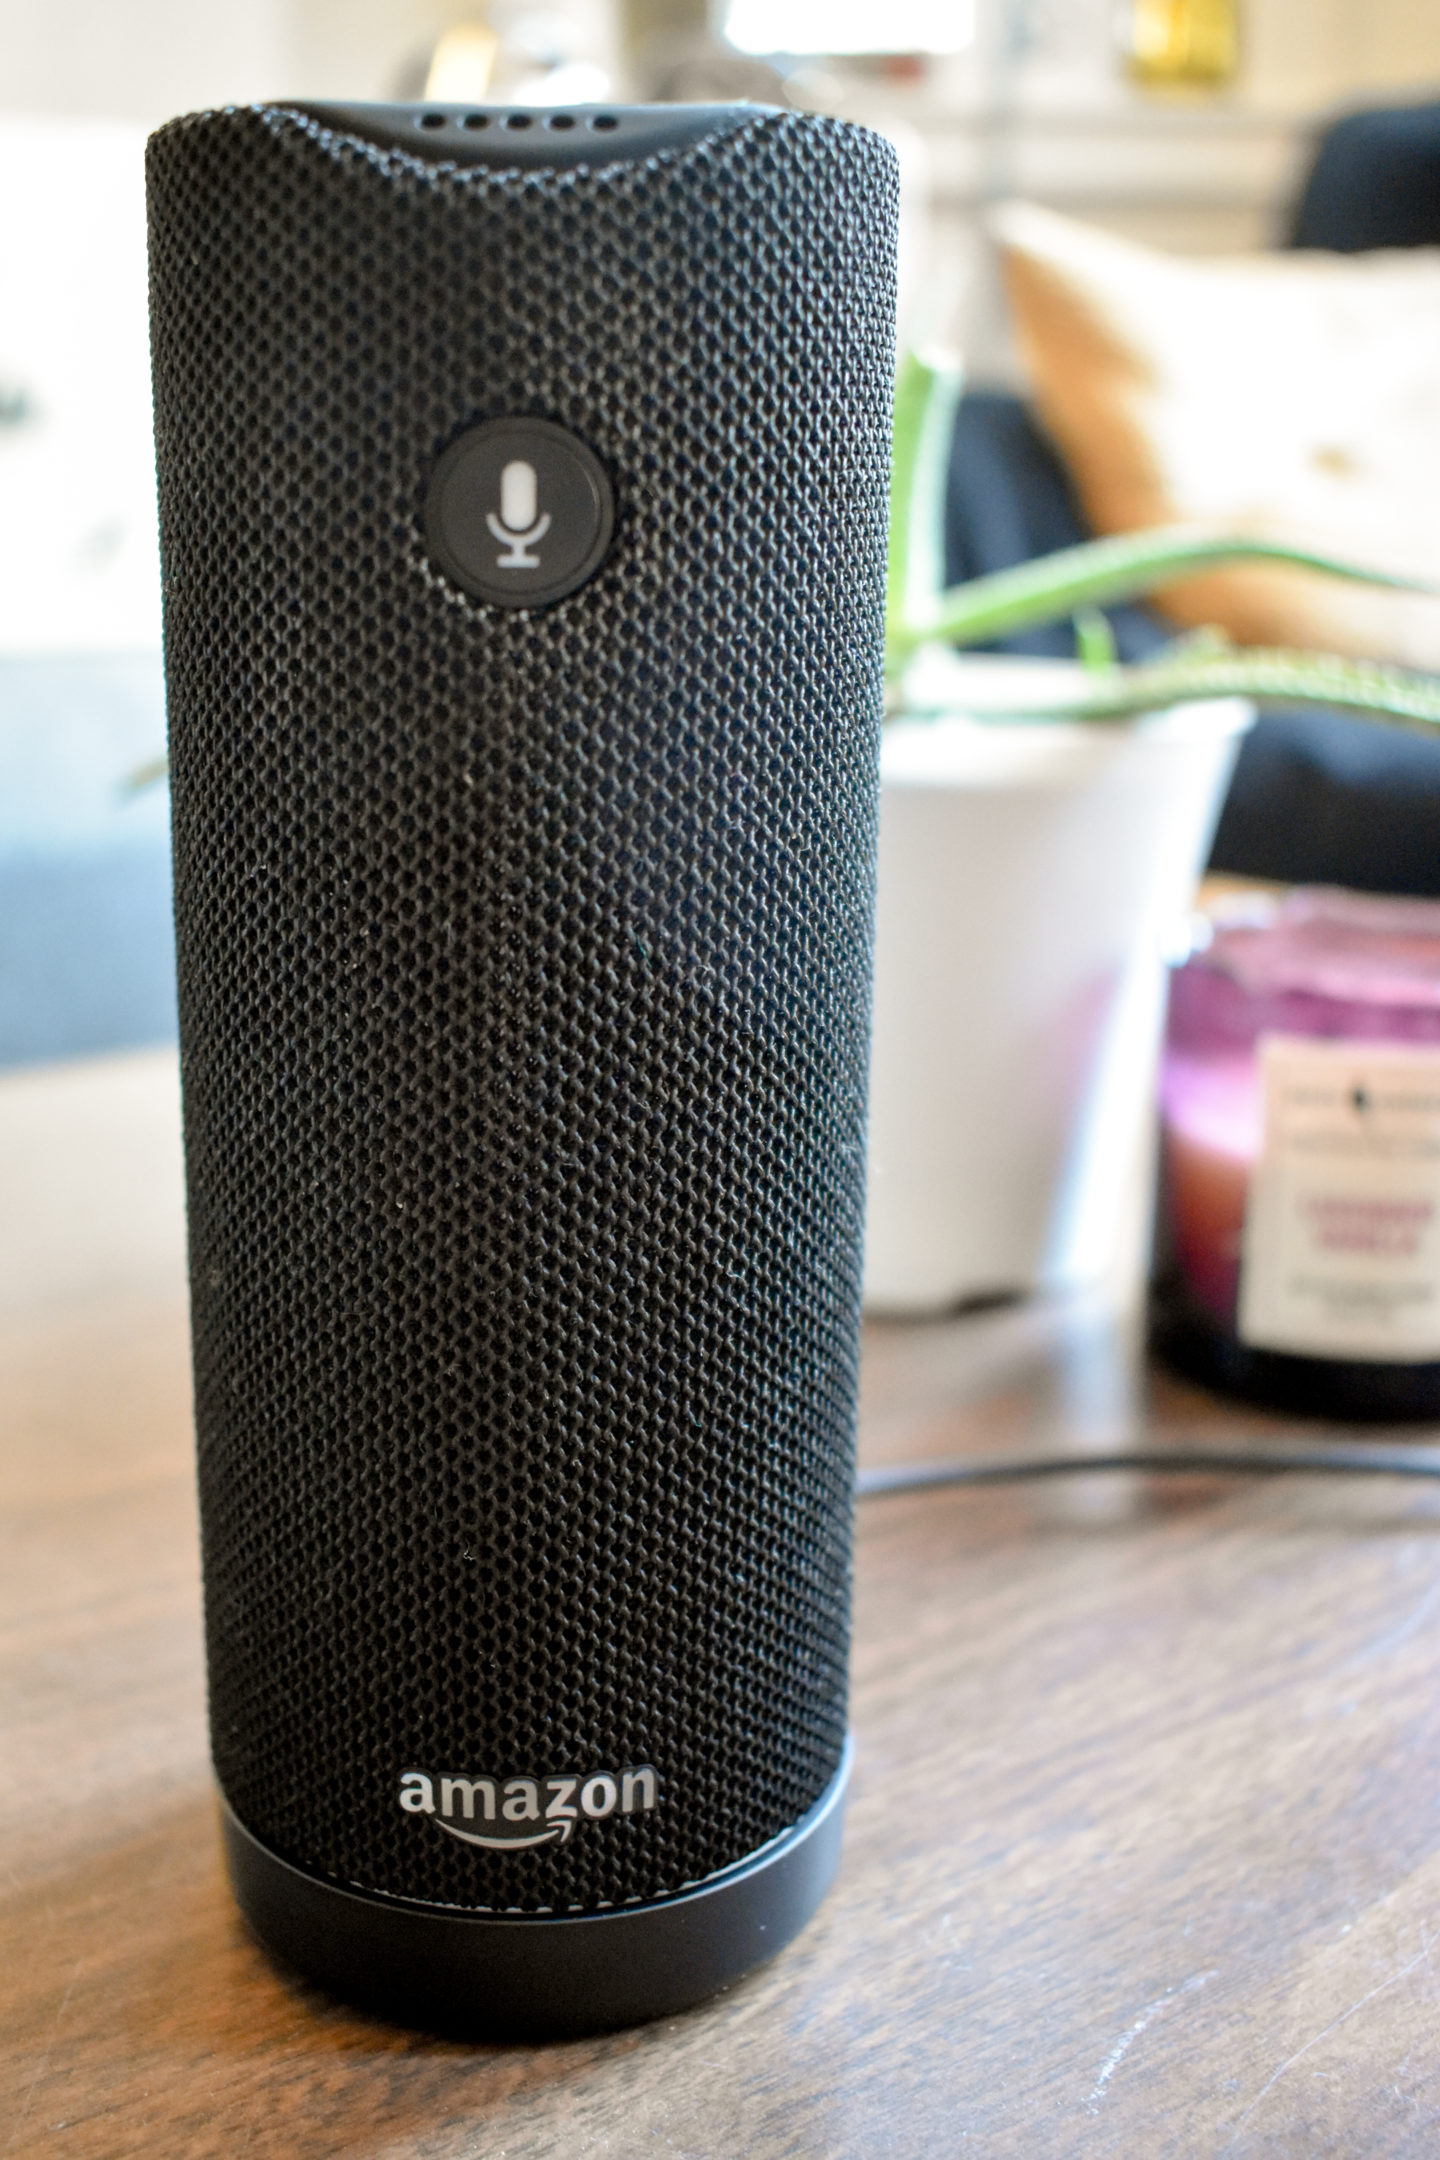 Hey y'all! This week's post is going to be a quick review of my Amazon Alexa and how I use it in my college dorm room, along with my two favorite Amazon Alexa hacks! 